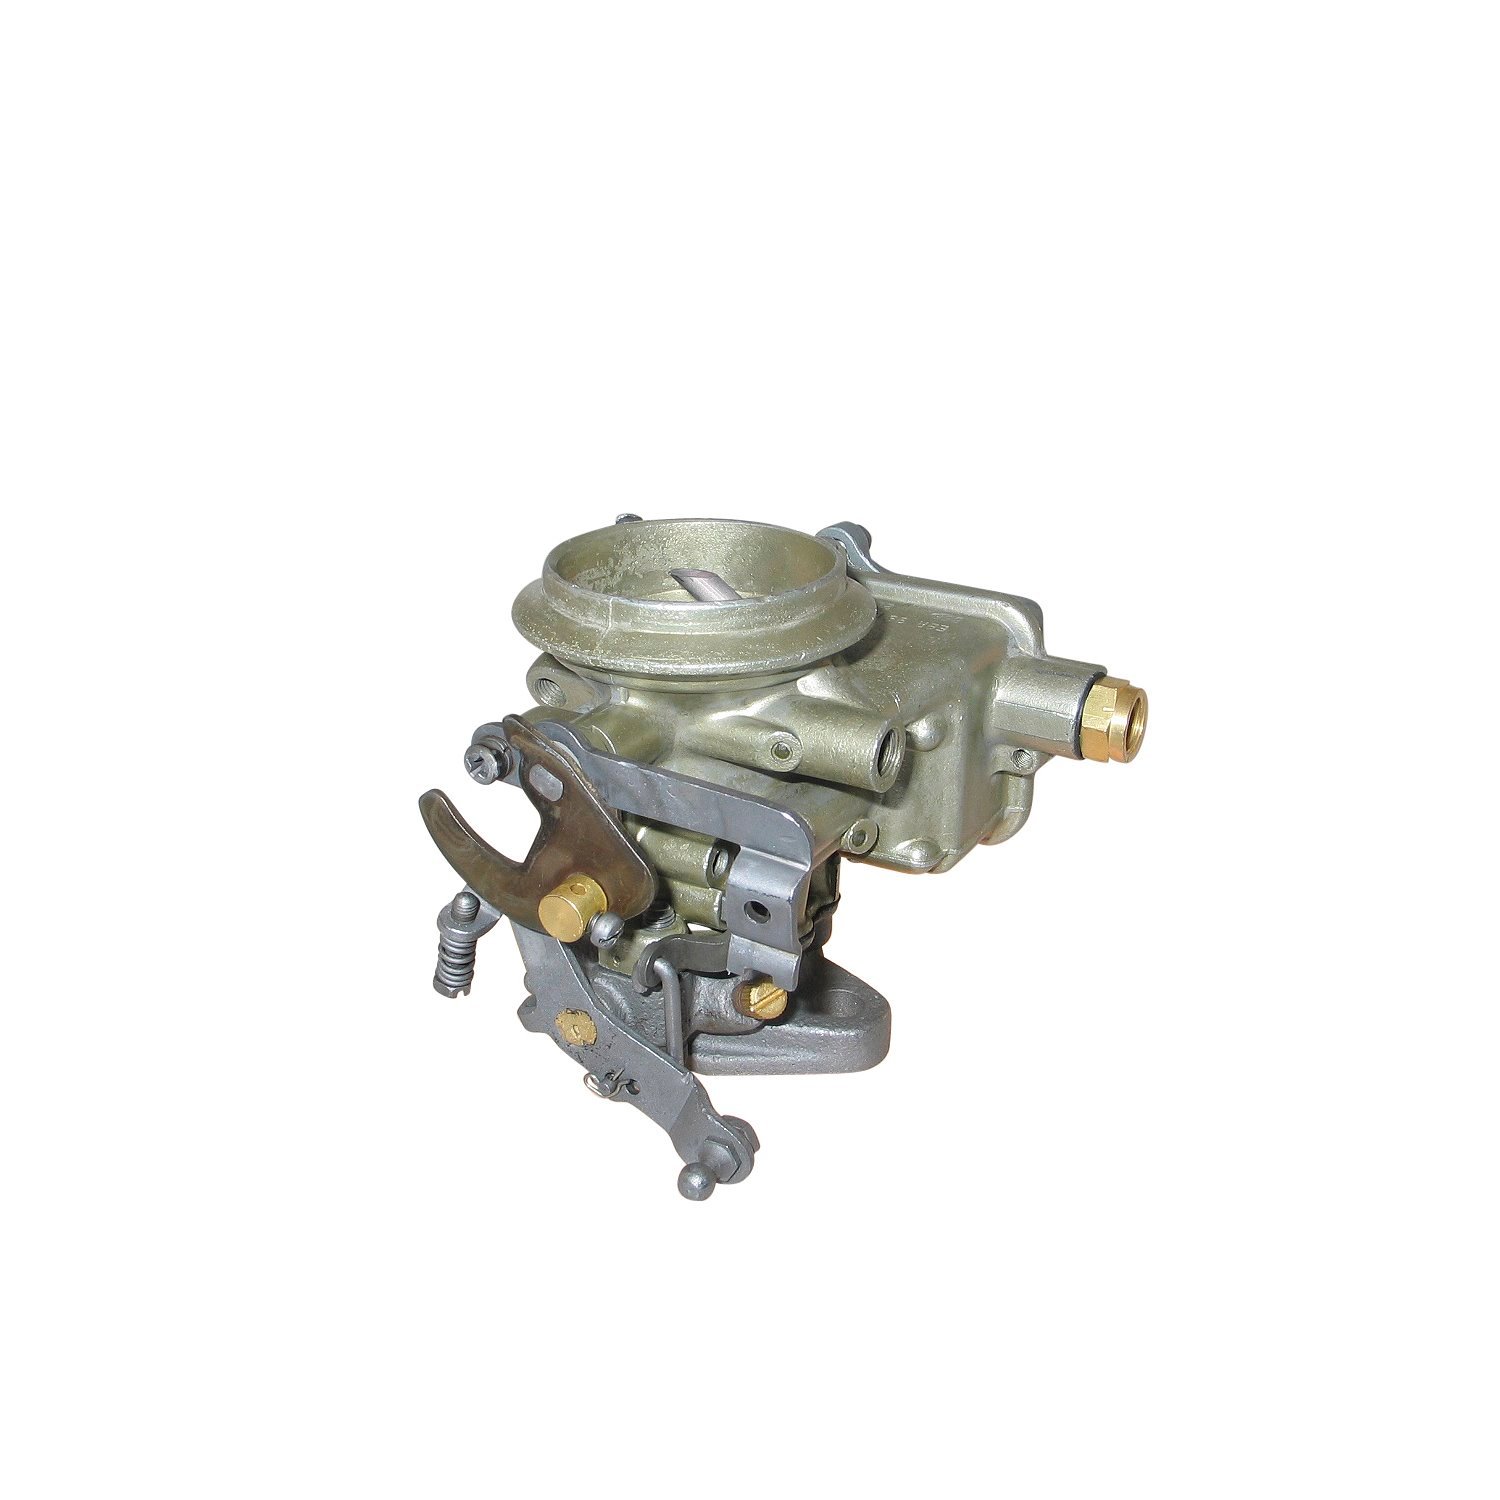 7-716 Holley Remanufactured Carburetor, 1920-Style